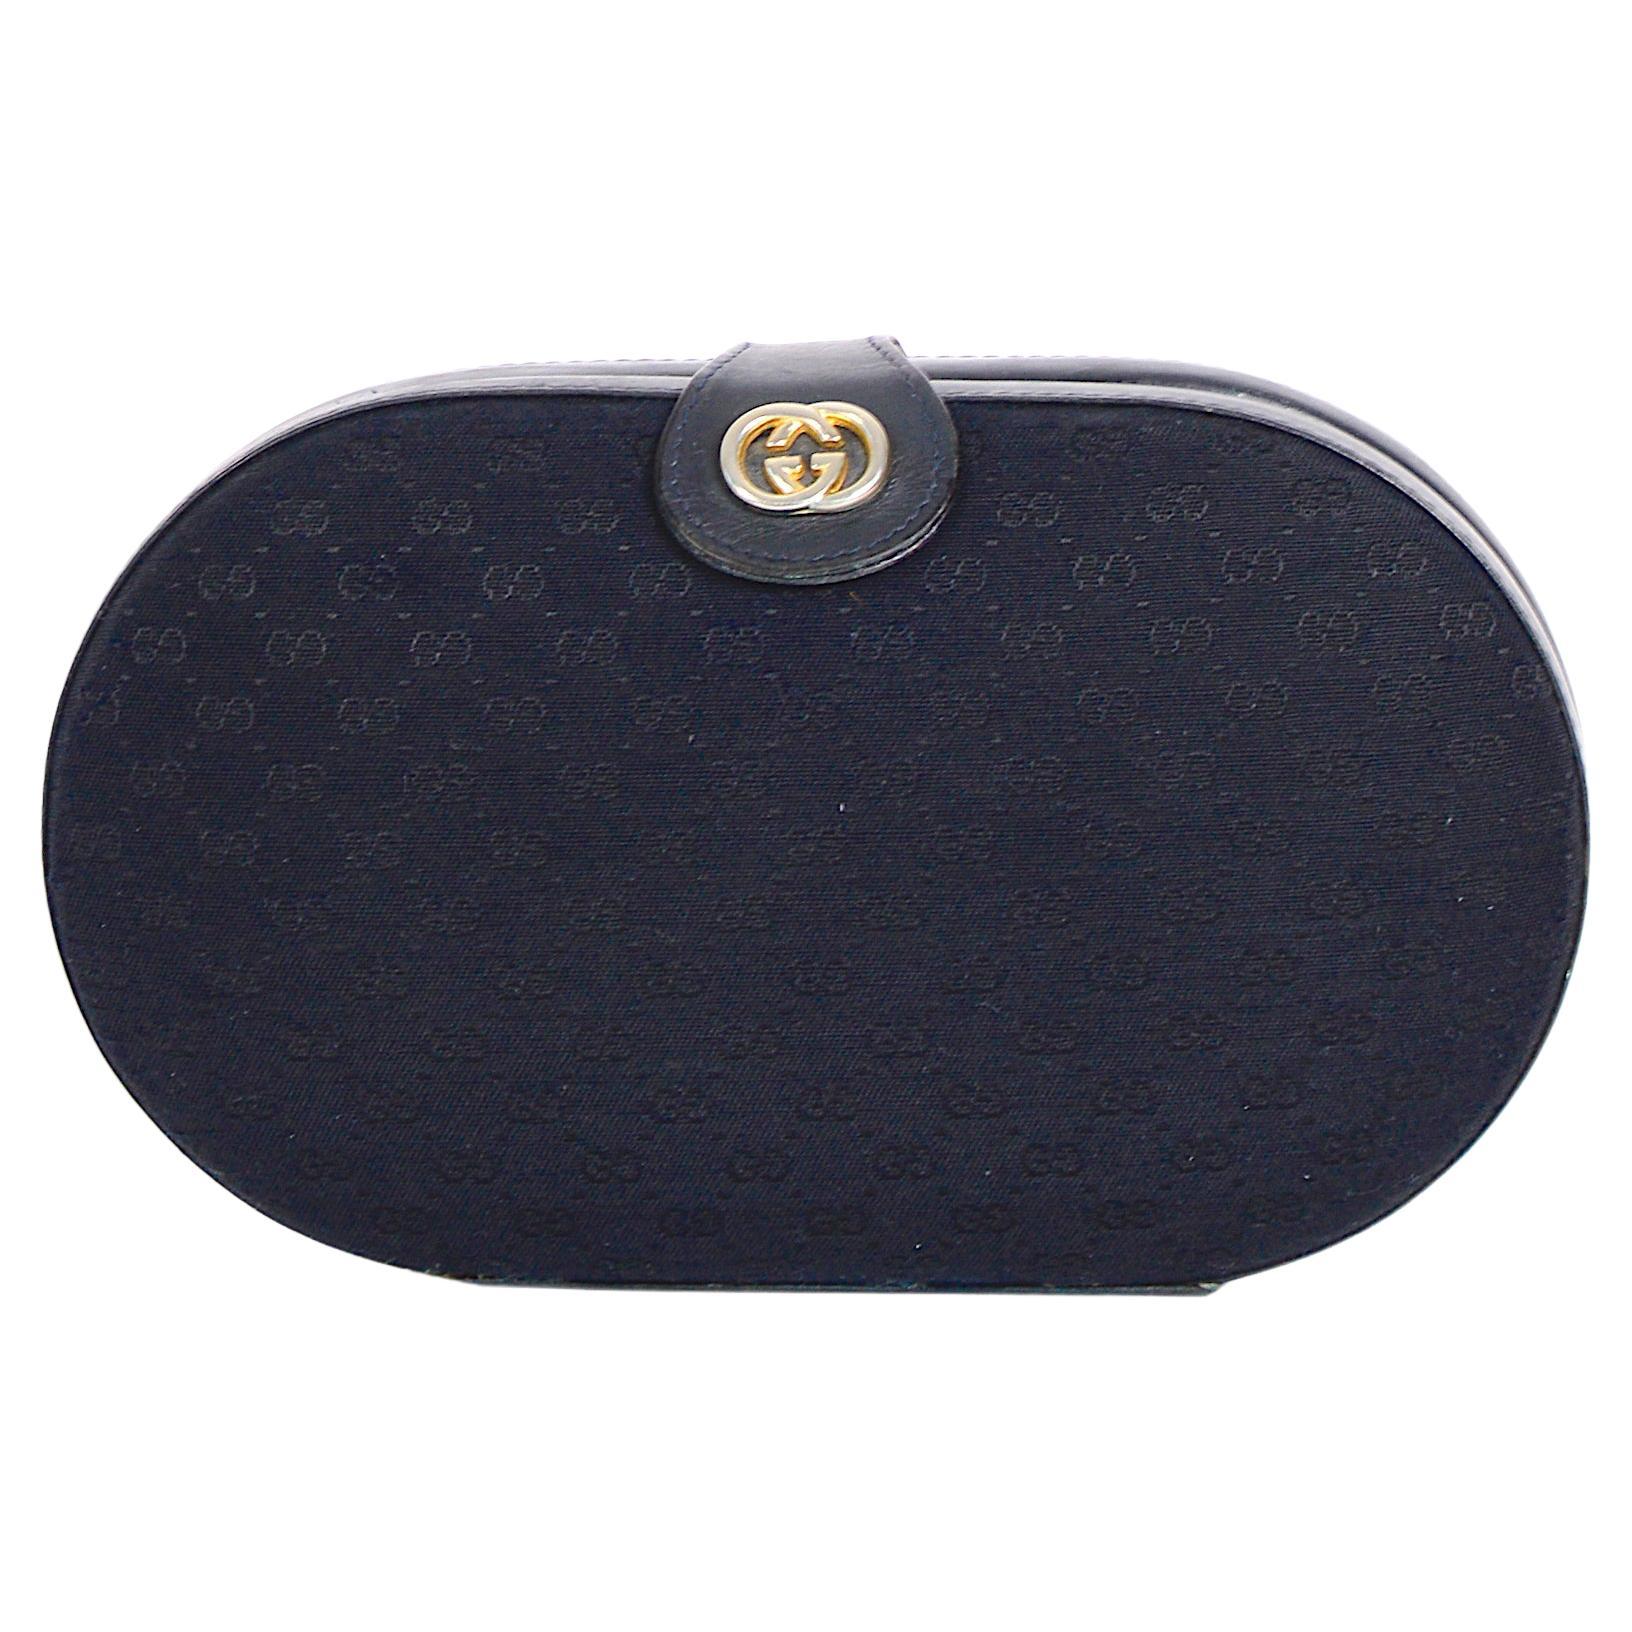 Gucci by Tom Ford bleu monogram canvas and leather clutch